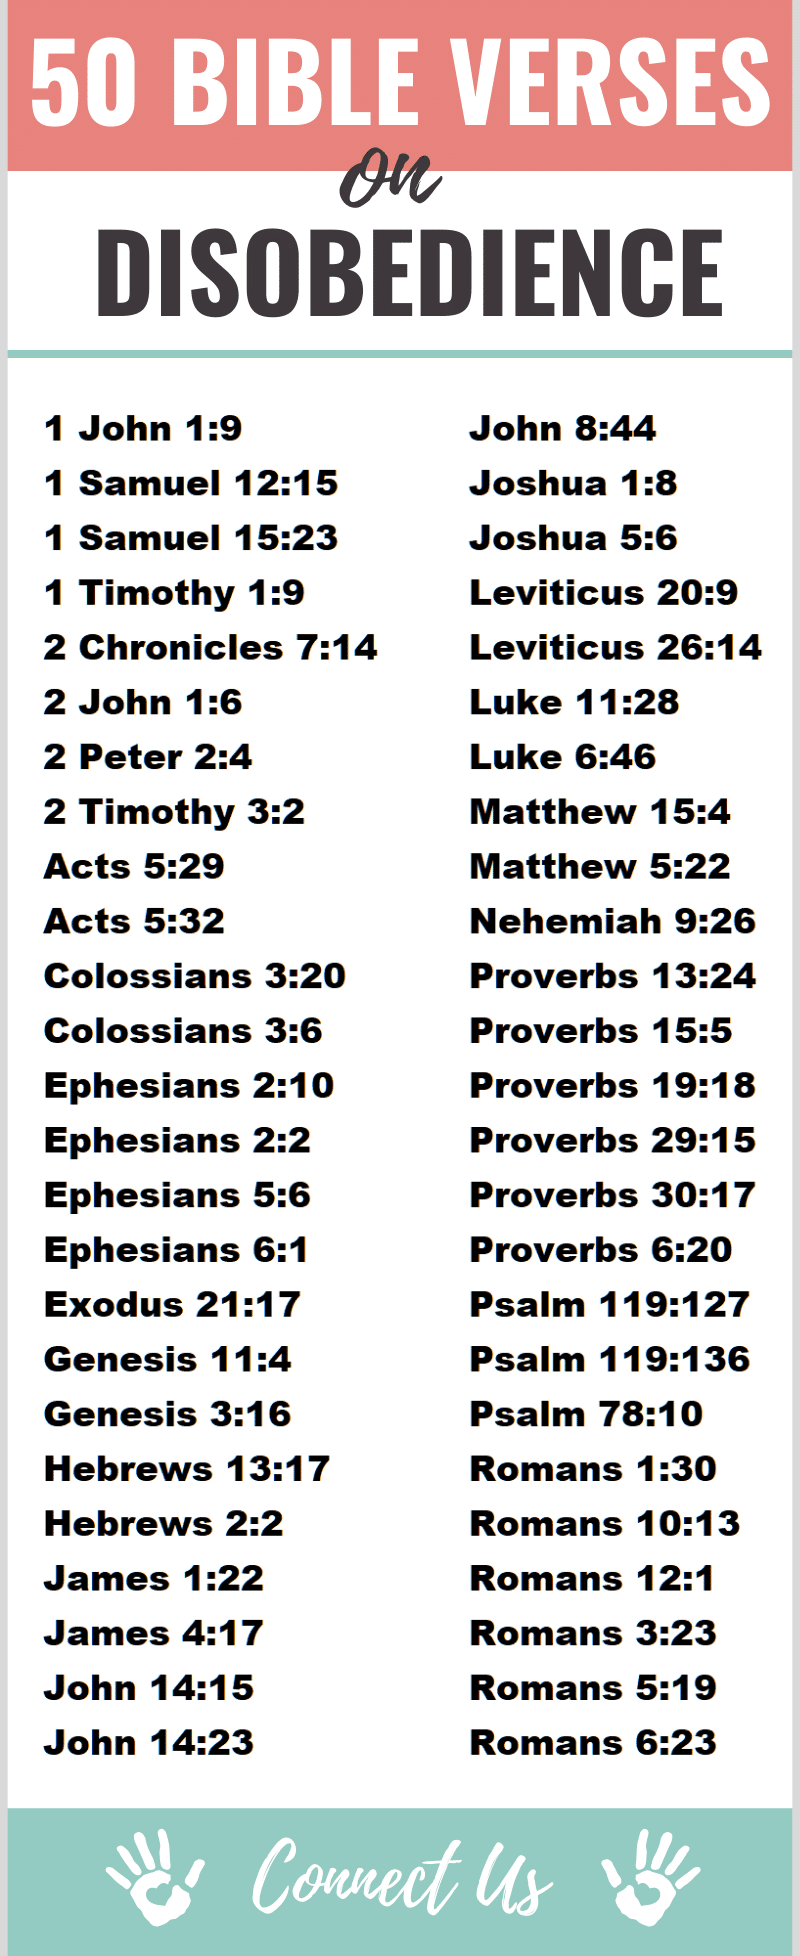 Bible Verses on Disobedience